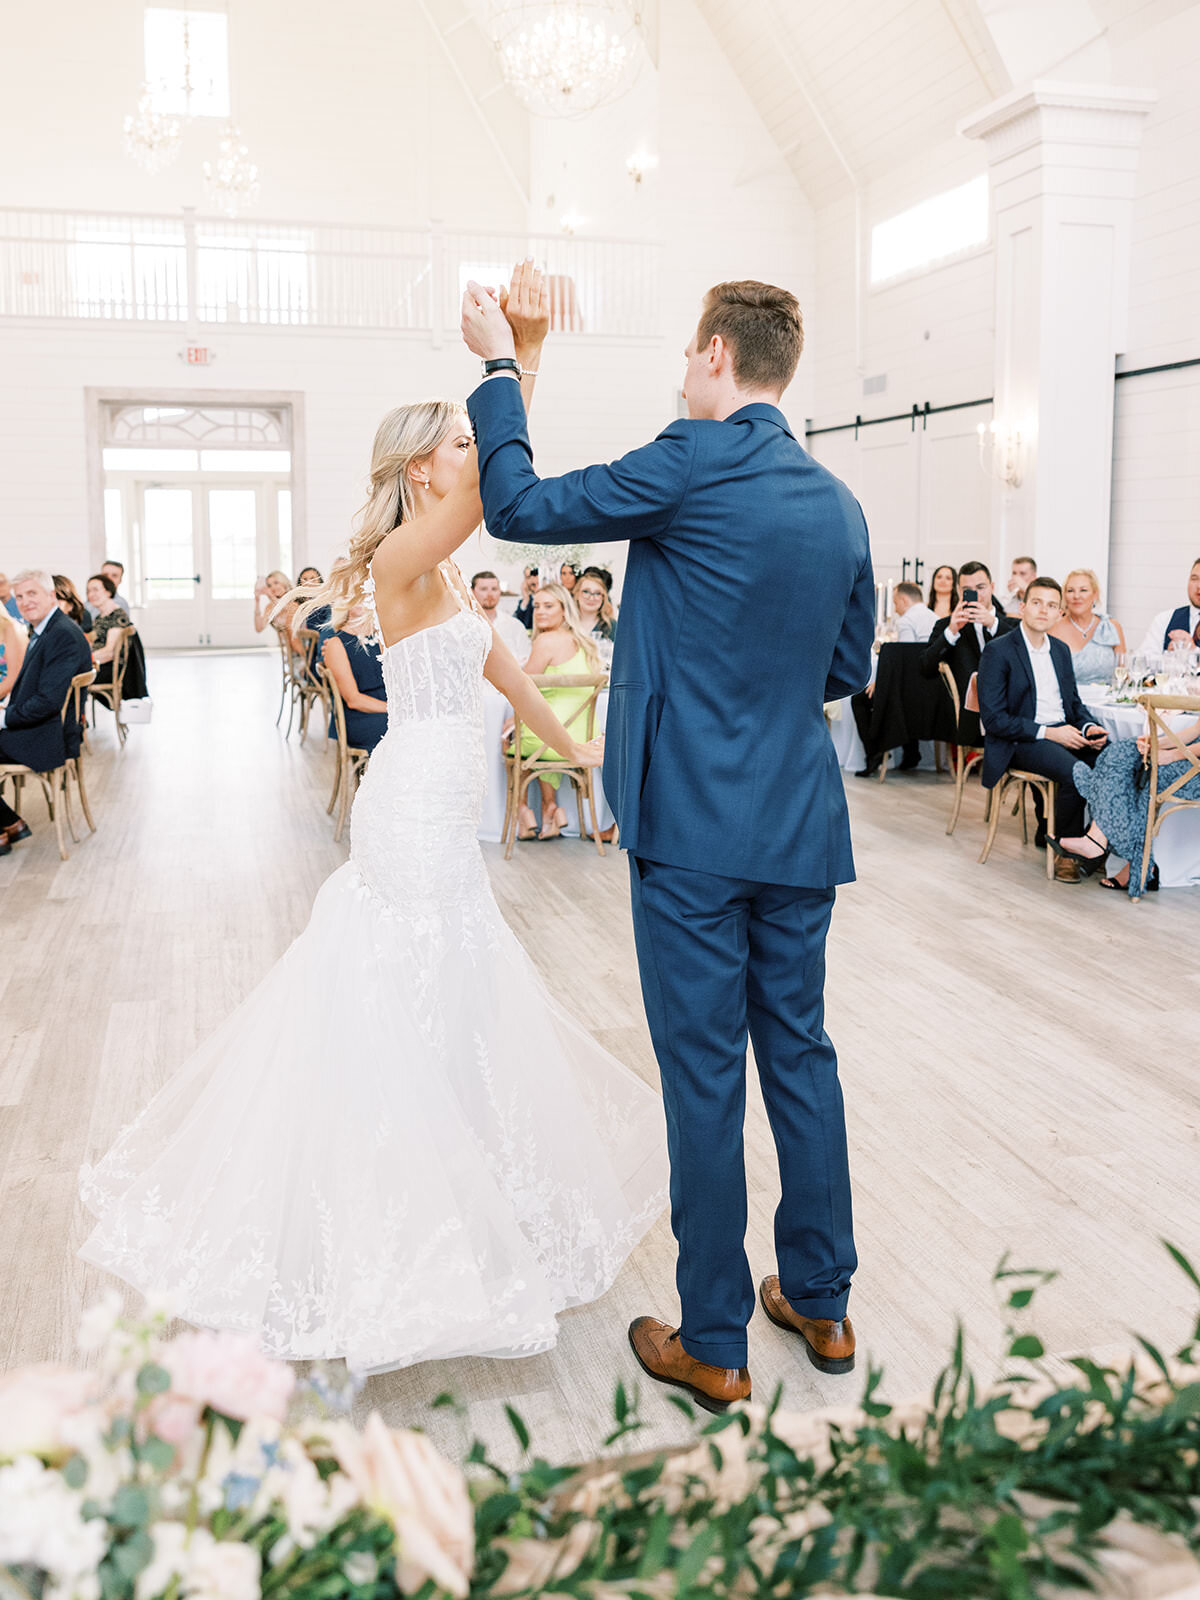 Groom spins his bride during their first dance as a married couple